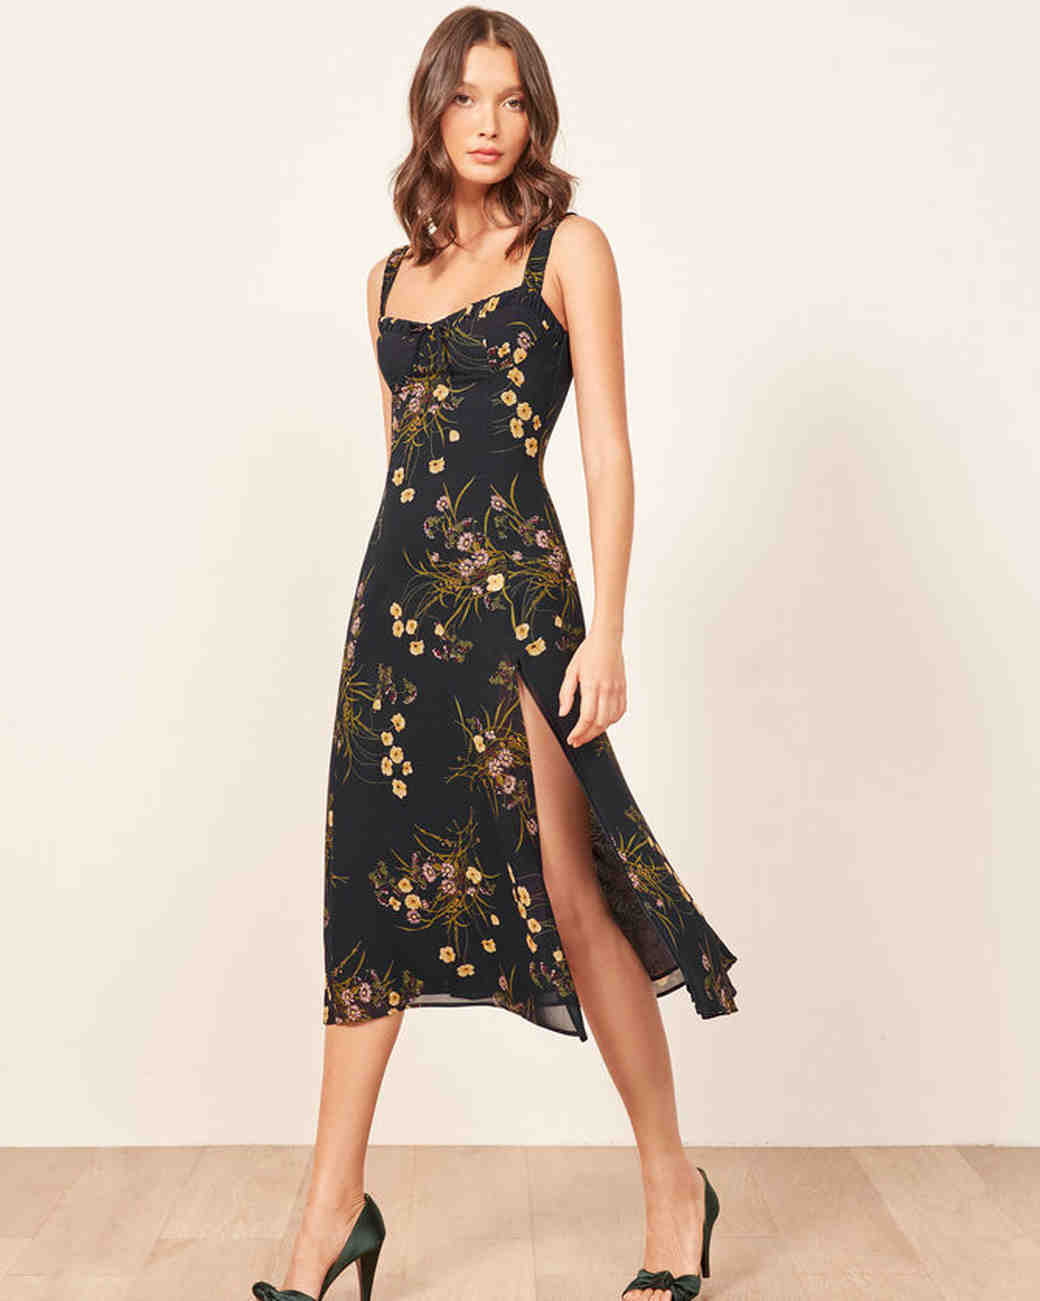 Wedding Guests Dresses
 25 Beautiful Dresses to Wear as a Wedding Guest This Fall